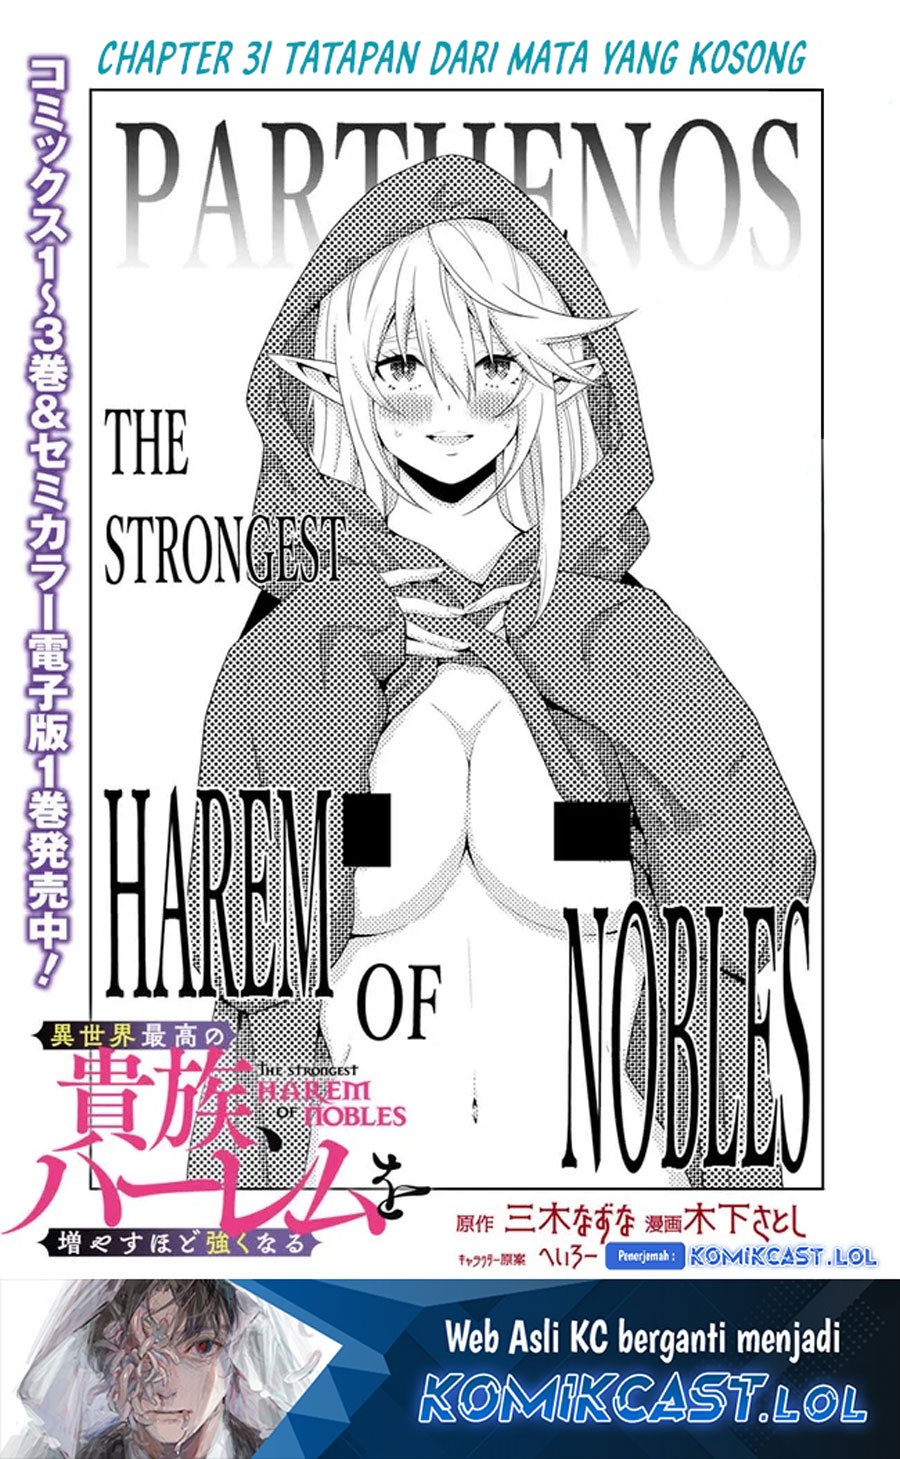 The Strongest Harem Of Nobles Chapter 31 - 99